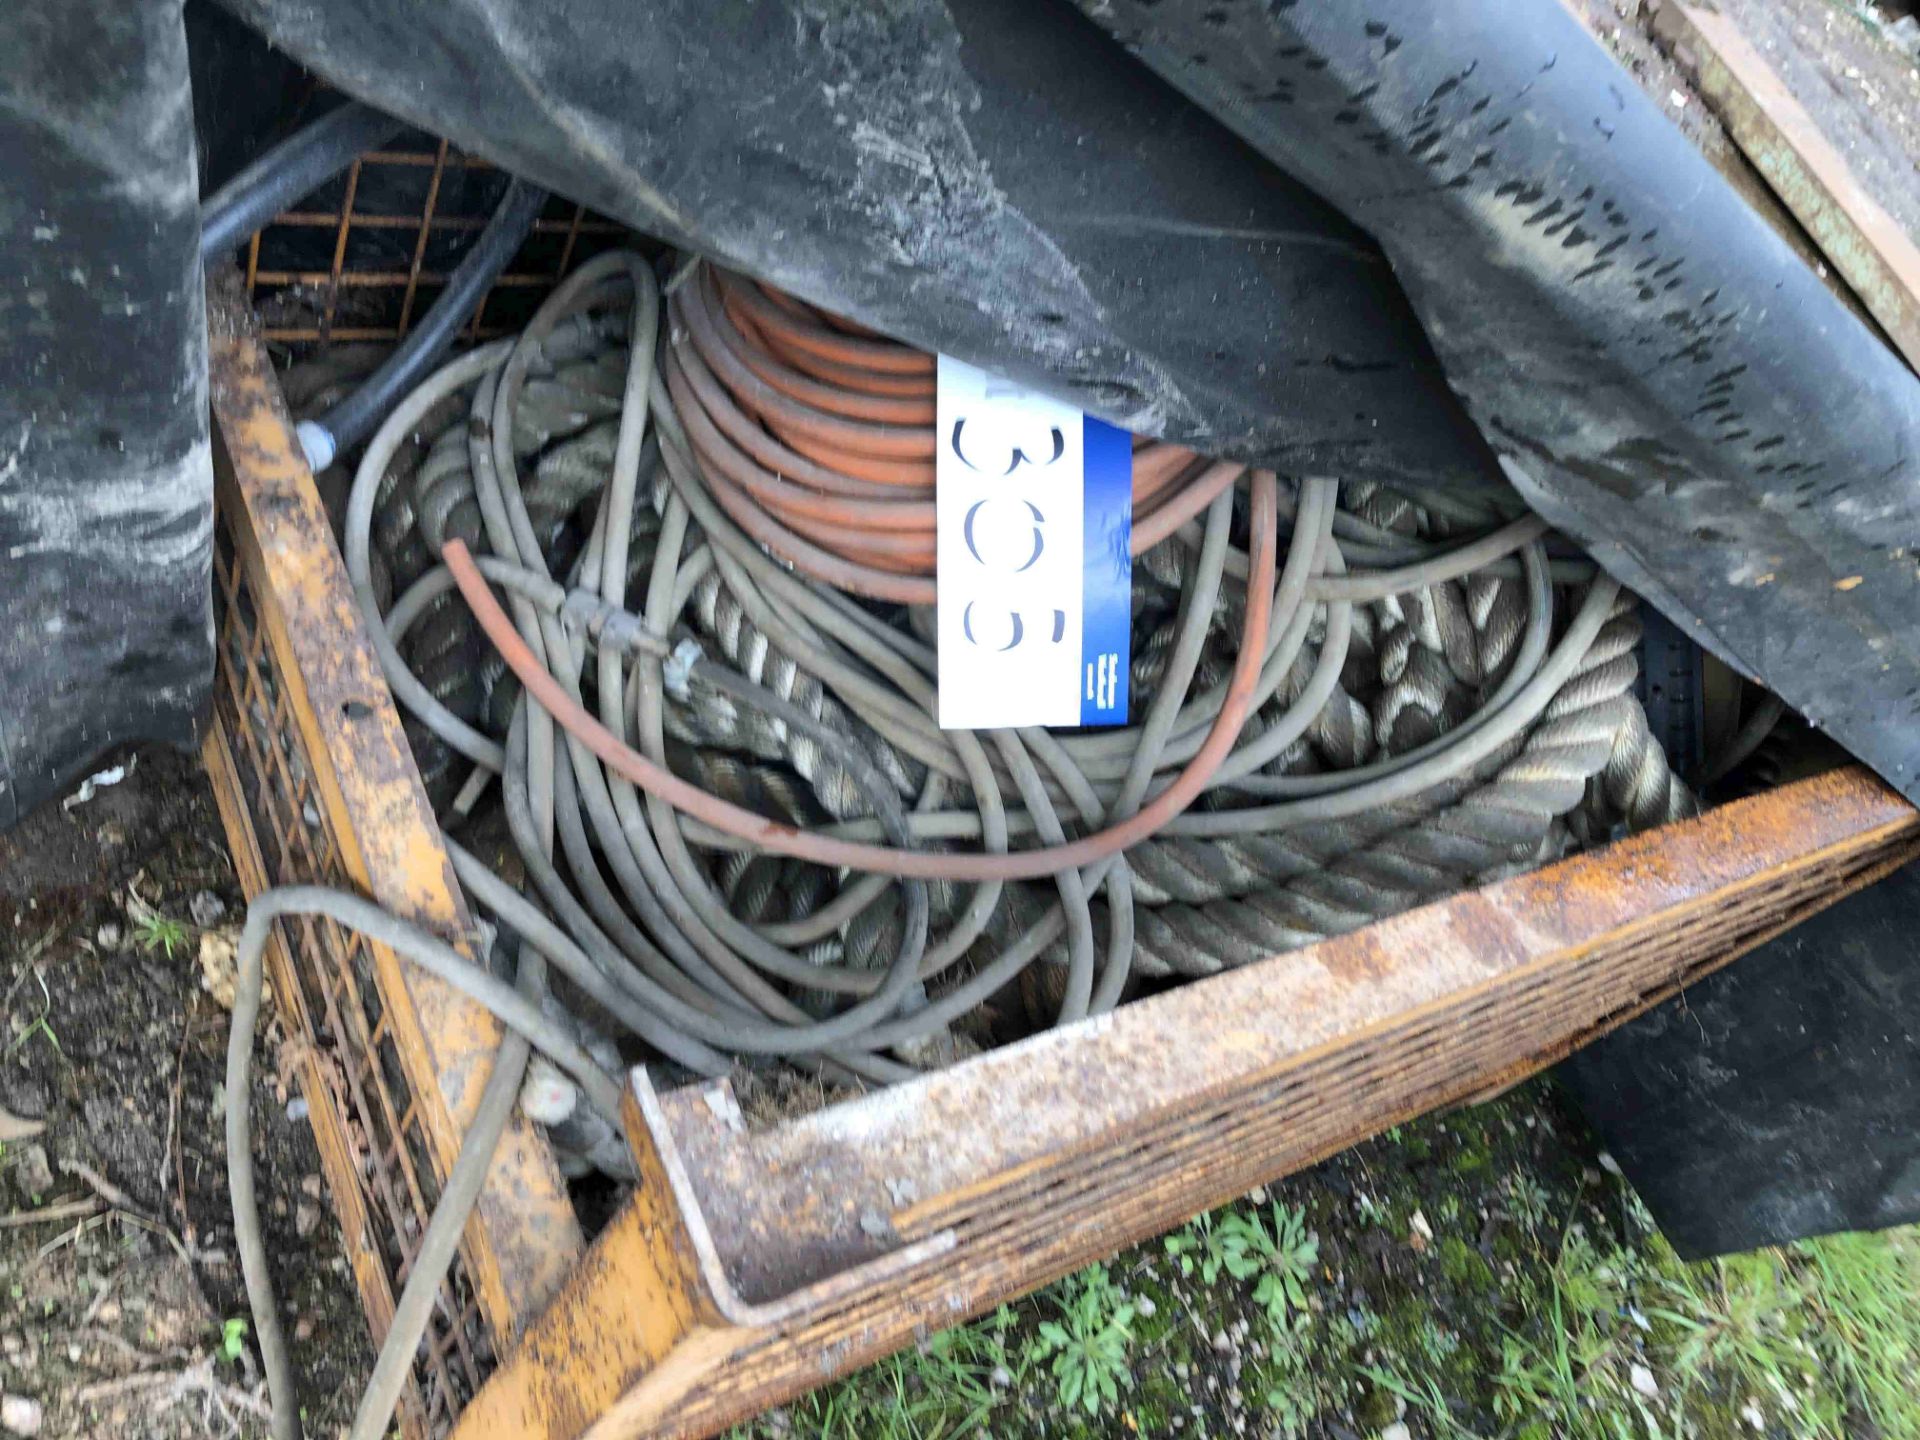 Contents of Box Pallet, including rope and flexible pipe